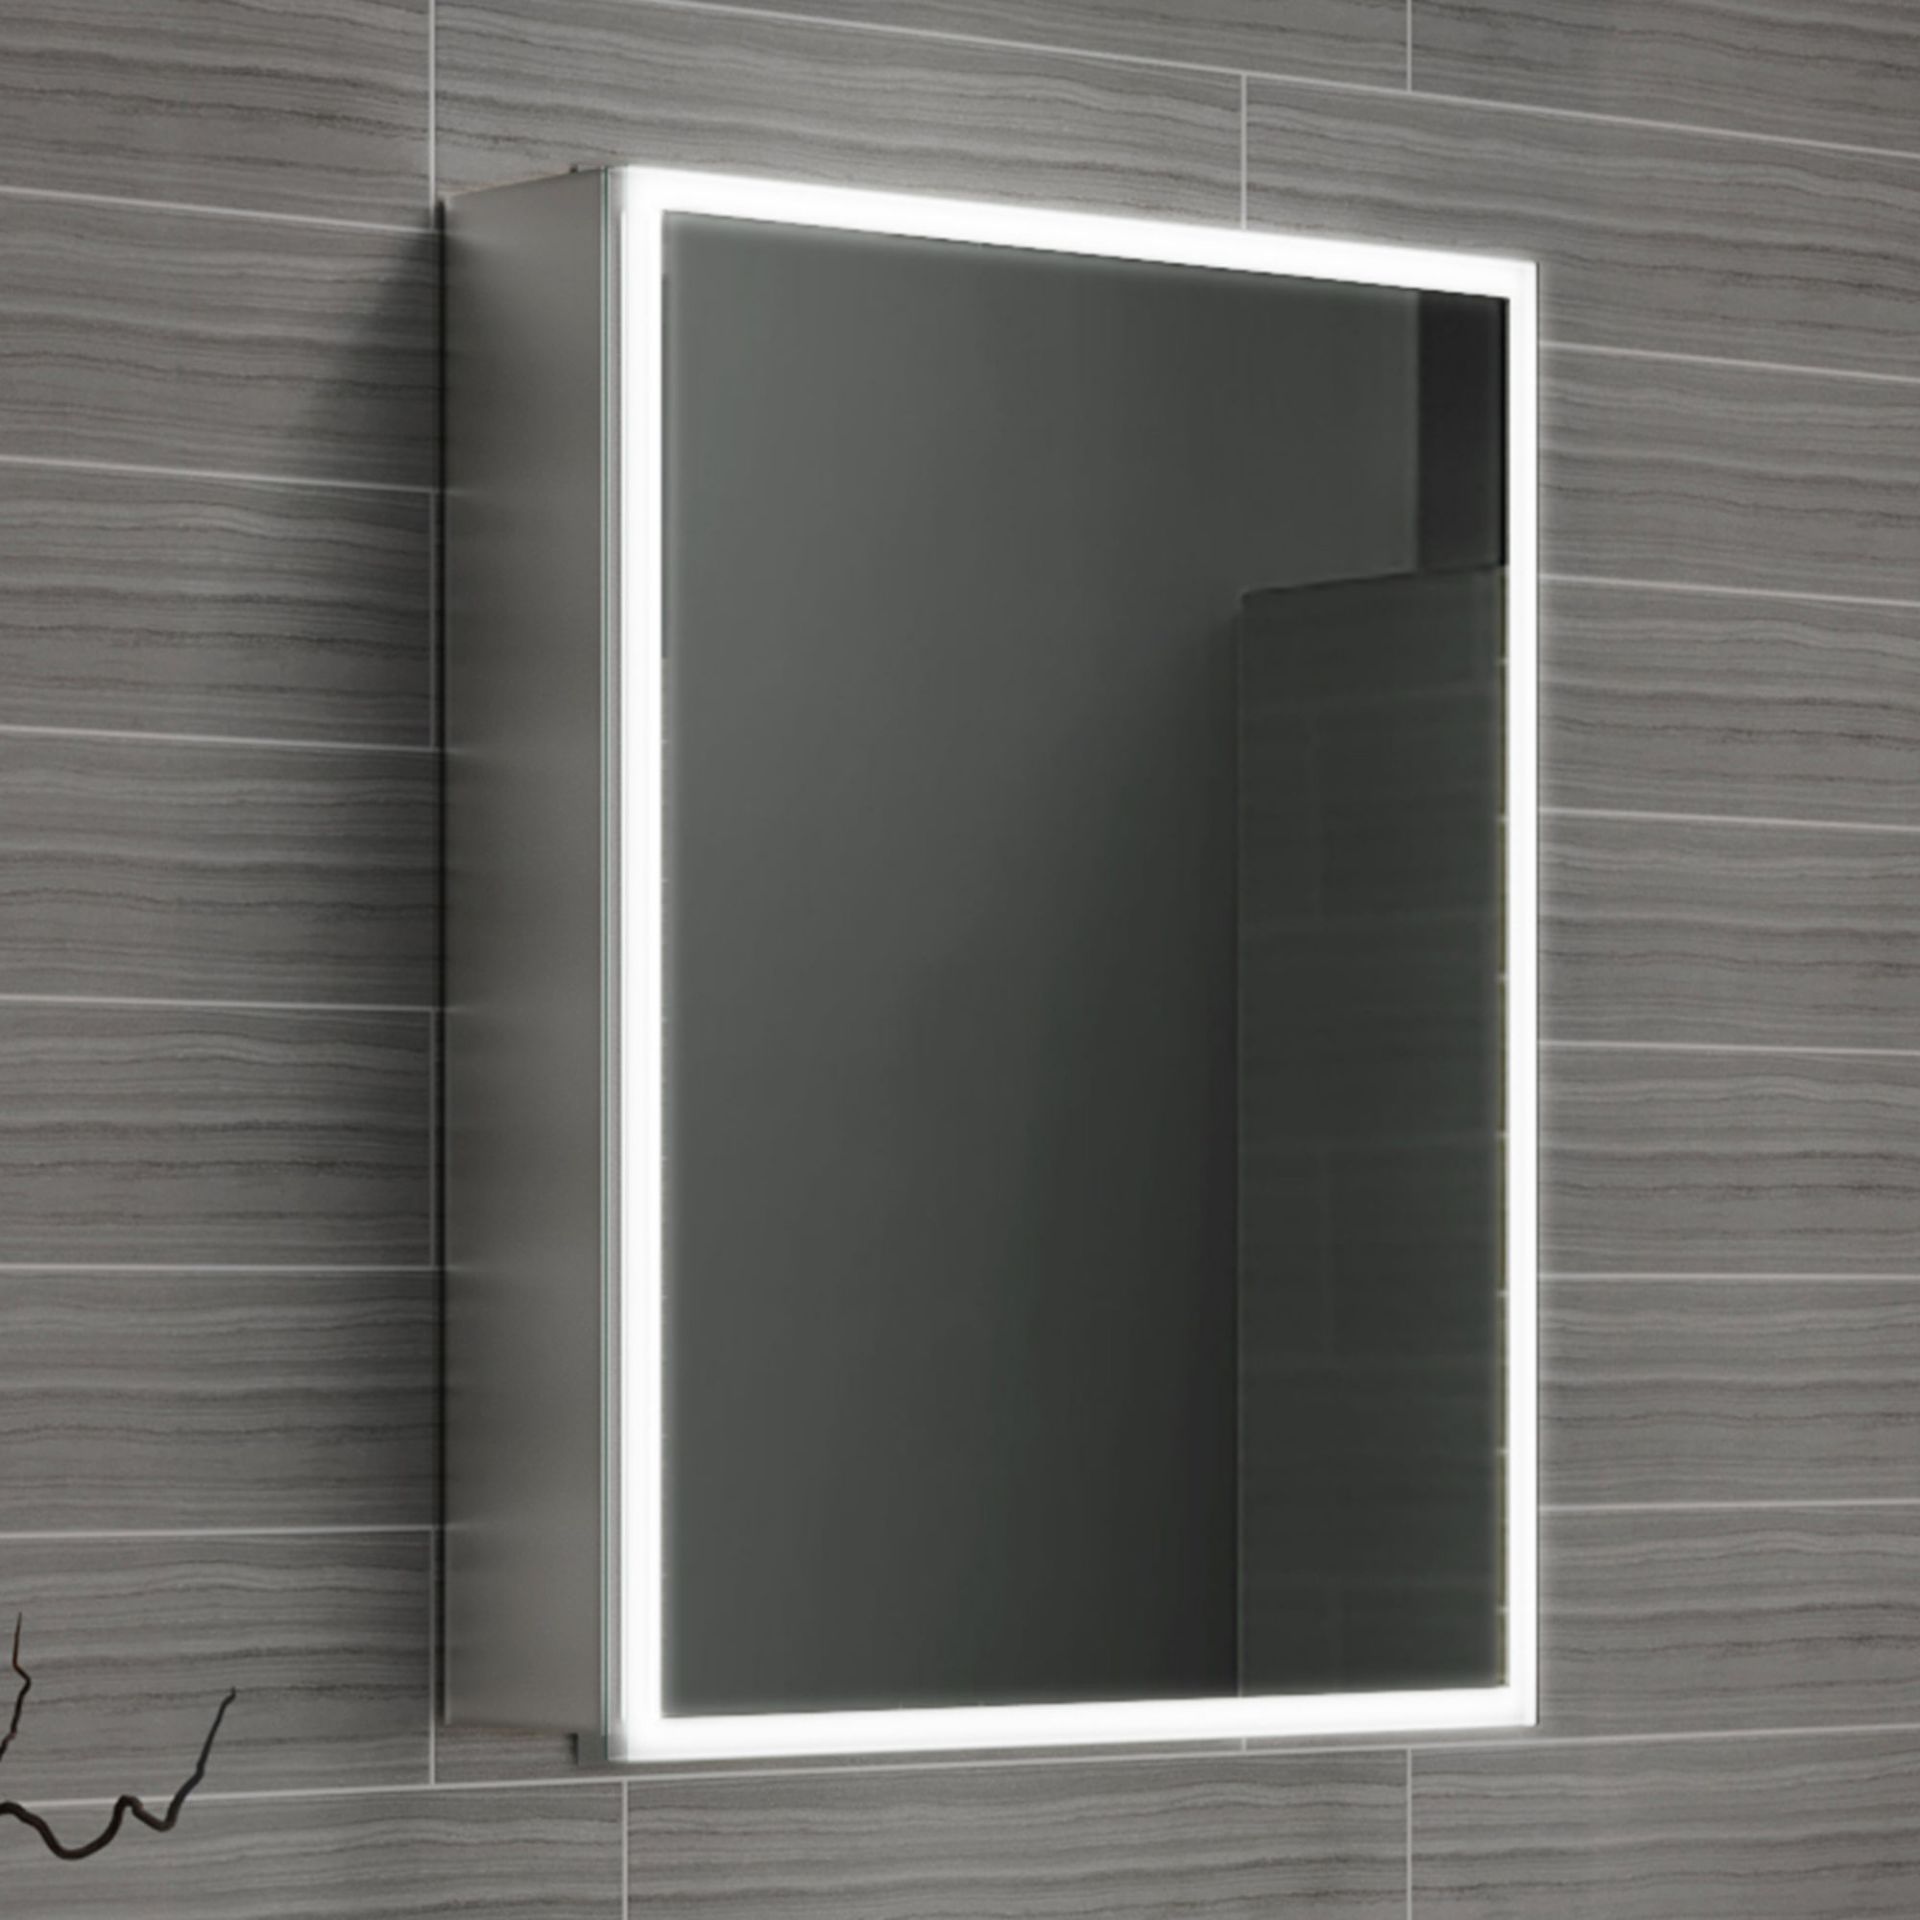 (QP176) 450x600 Cosmic Illuminated LED Mirror Cabinet. RRP £574.99. We love this mirror(QP176)